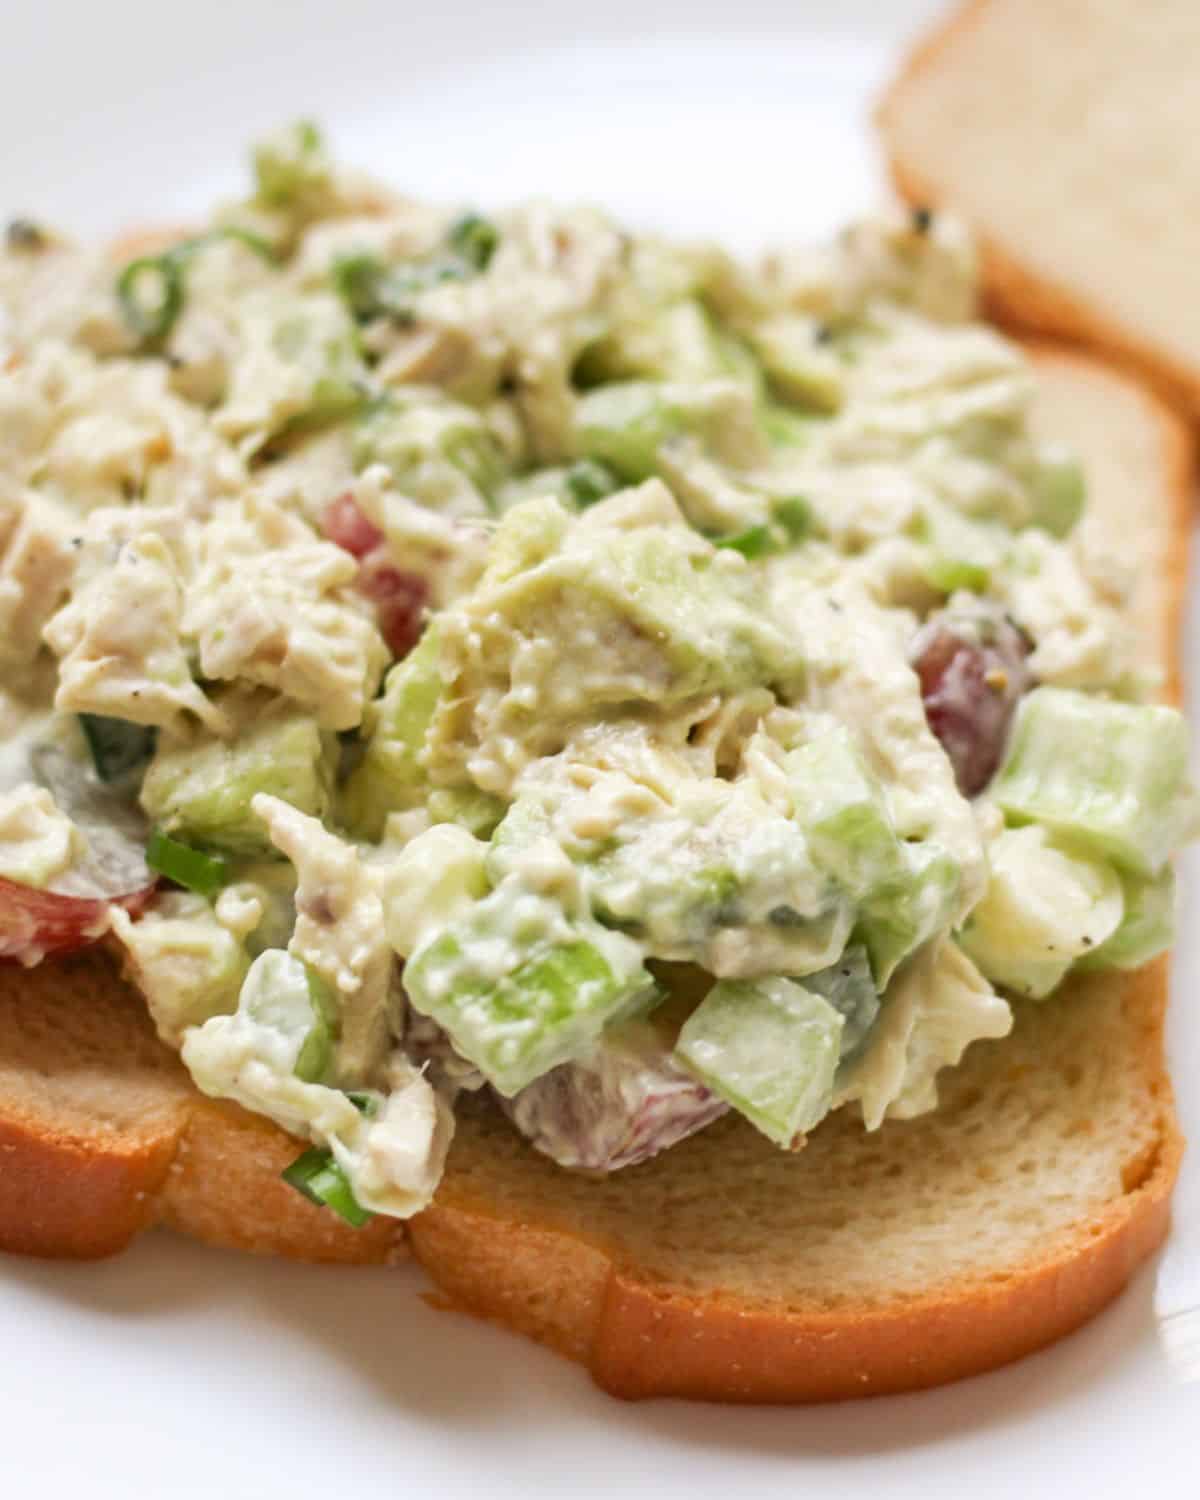 A slice of white bread topped with creamy salad.